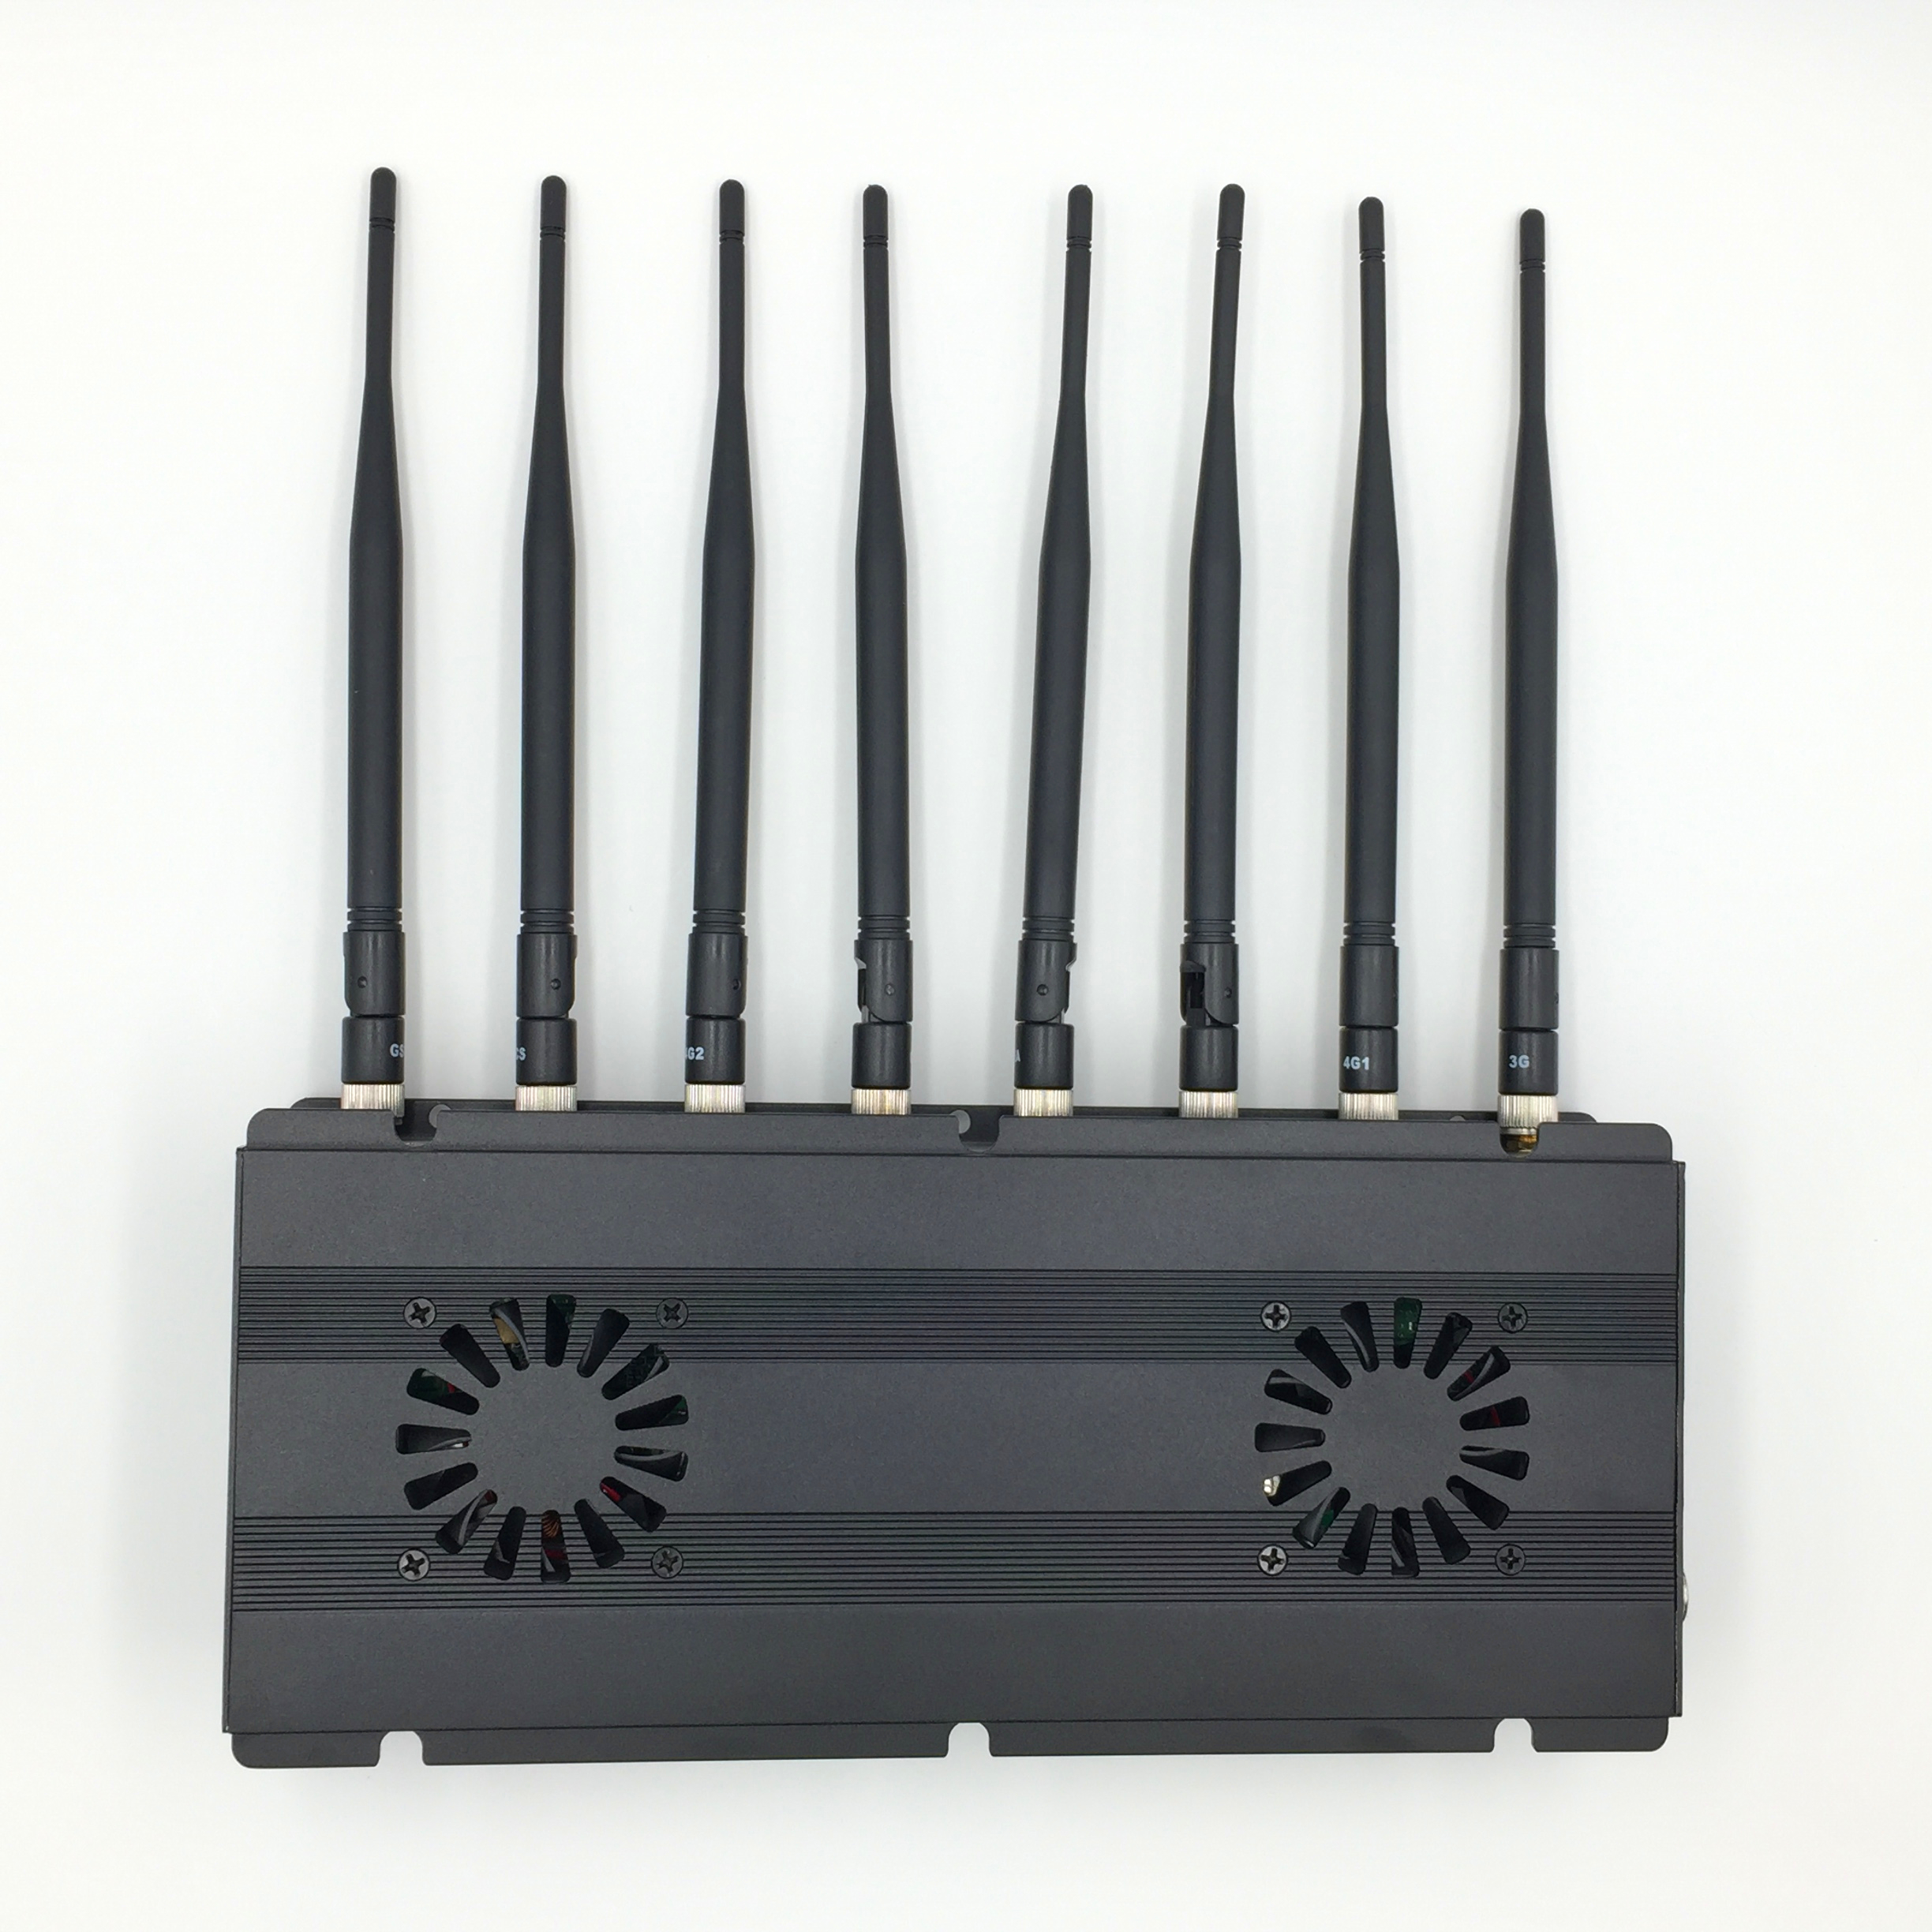 jammer kit lowes deck - Black Desktop 8 Antenna Signal Jammers With GSM 3G 4G GPS WiFi LOJACK